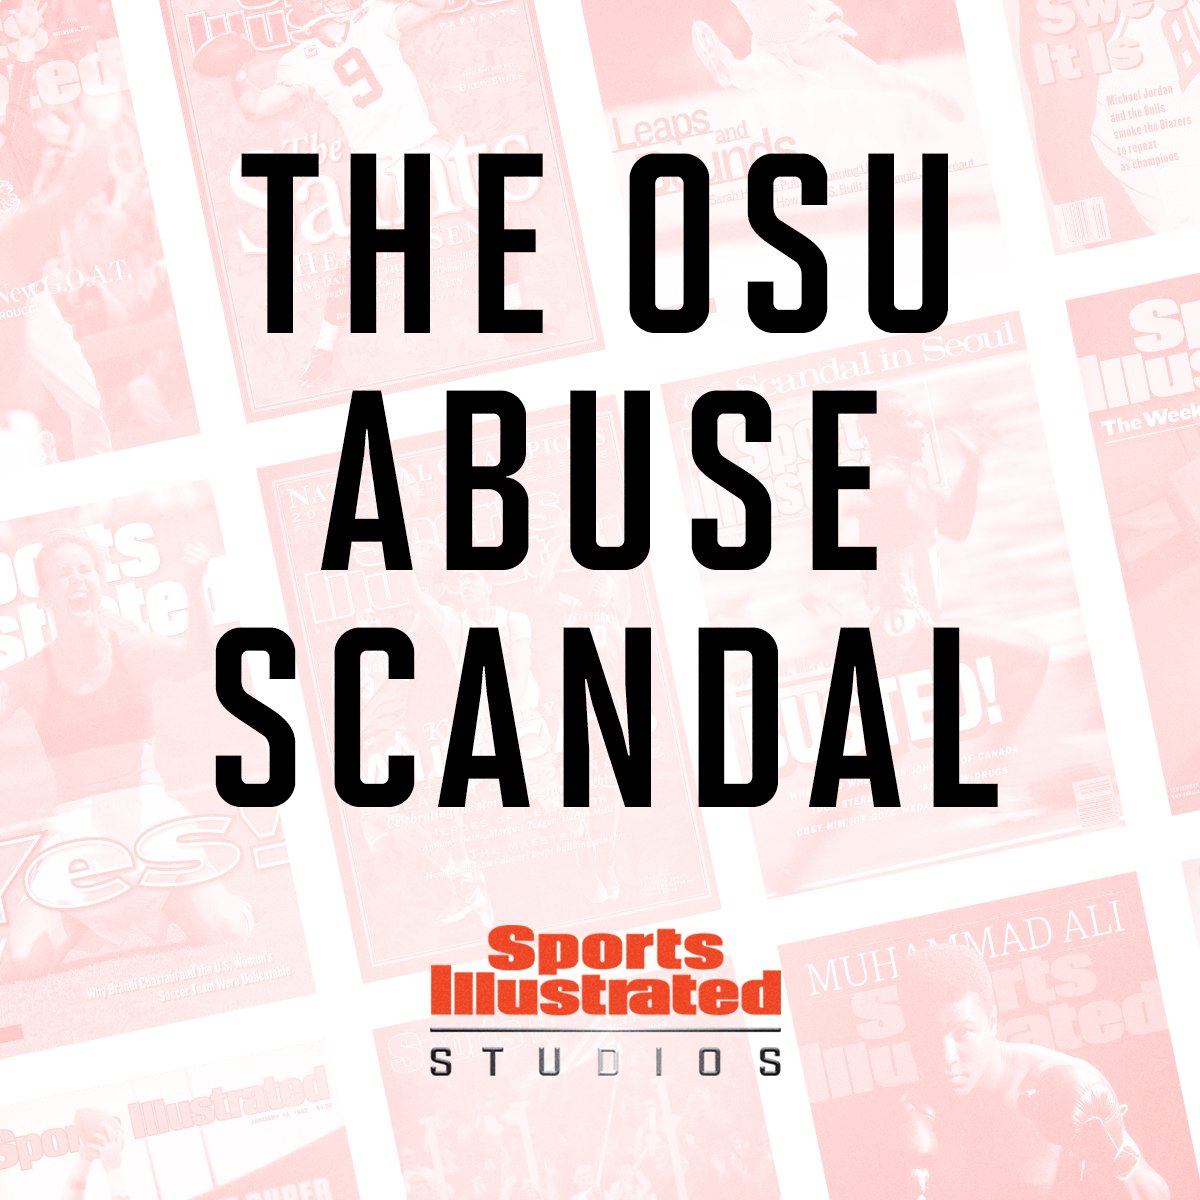 Smokehouse Pictures and Sports Illustrated Studios are producing a docuseries based on Executive Editor L. Jon Wertheim’s groundbreaking cover story detailing prolific abuse at Ohio State University. The series will further detail the scandal that lasted 3 decades.